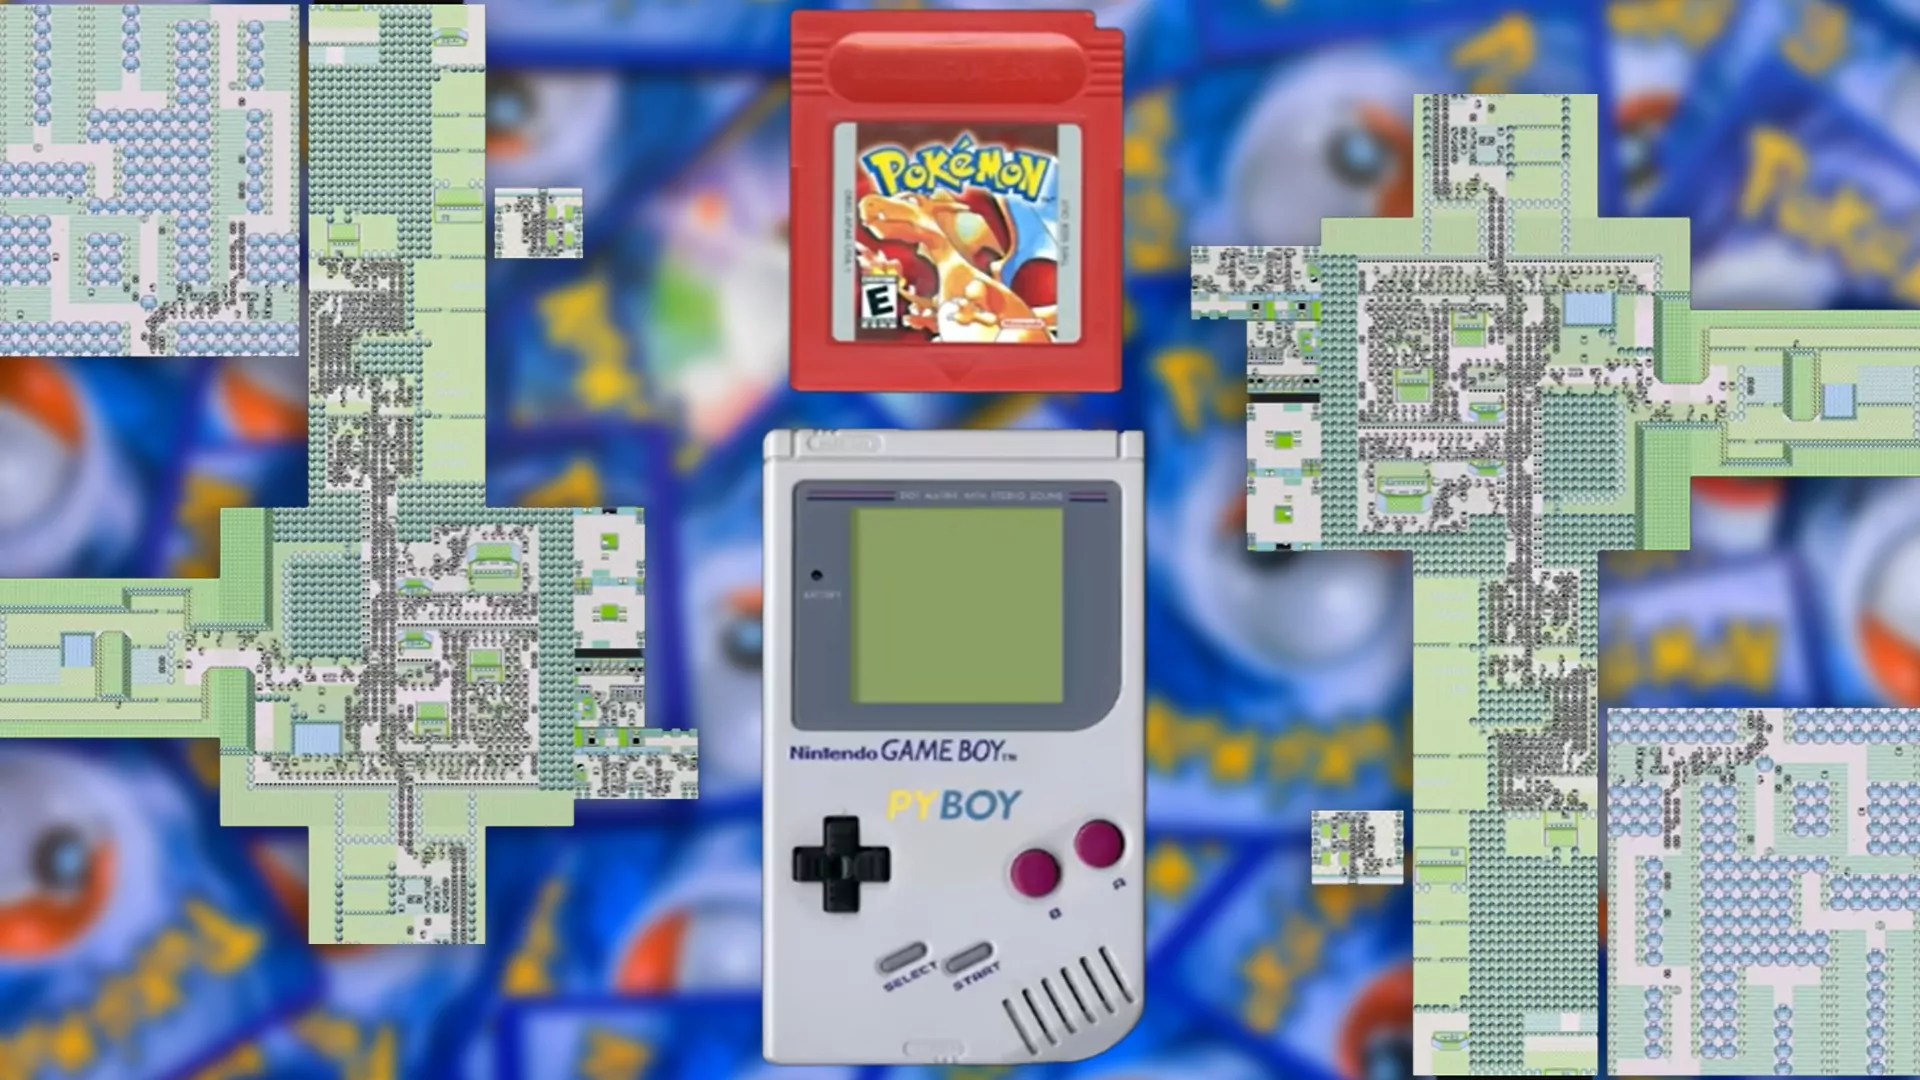 (The resourceful inventor used Gameboy emulator PyBoy for his experiment. (Joaquin Corbalan/Adobe Stock; Peter Whidden))